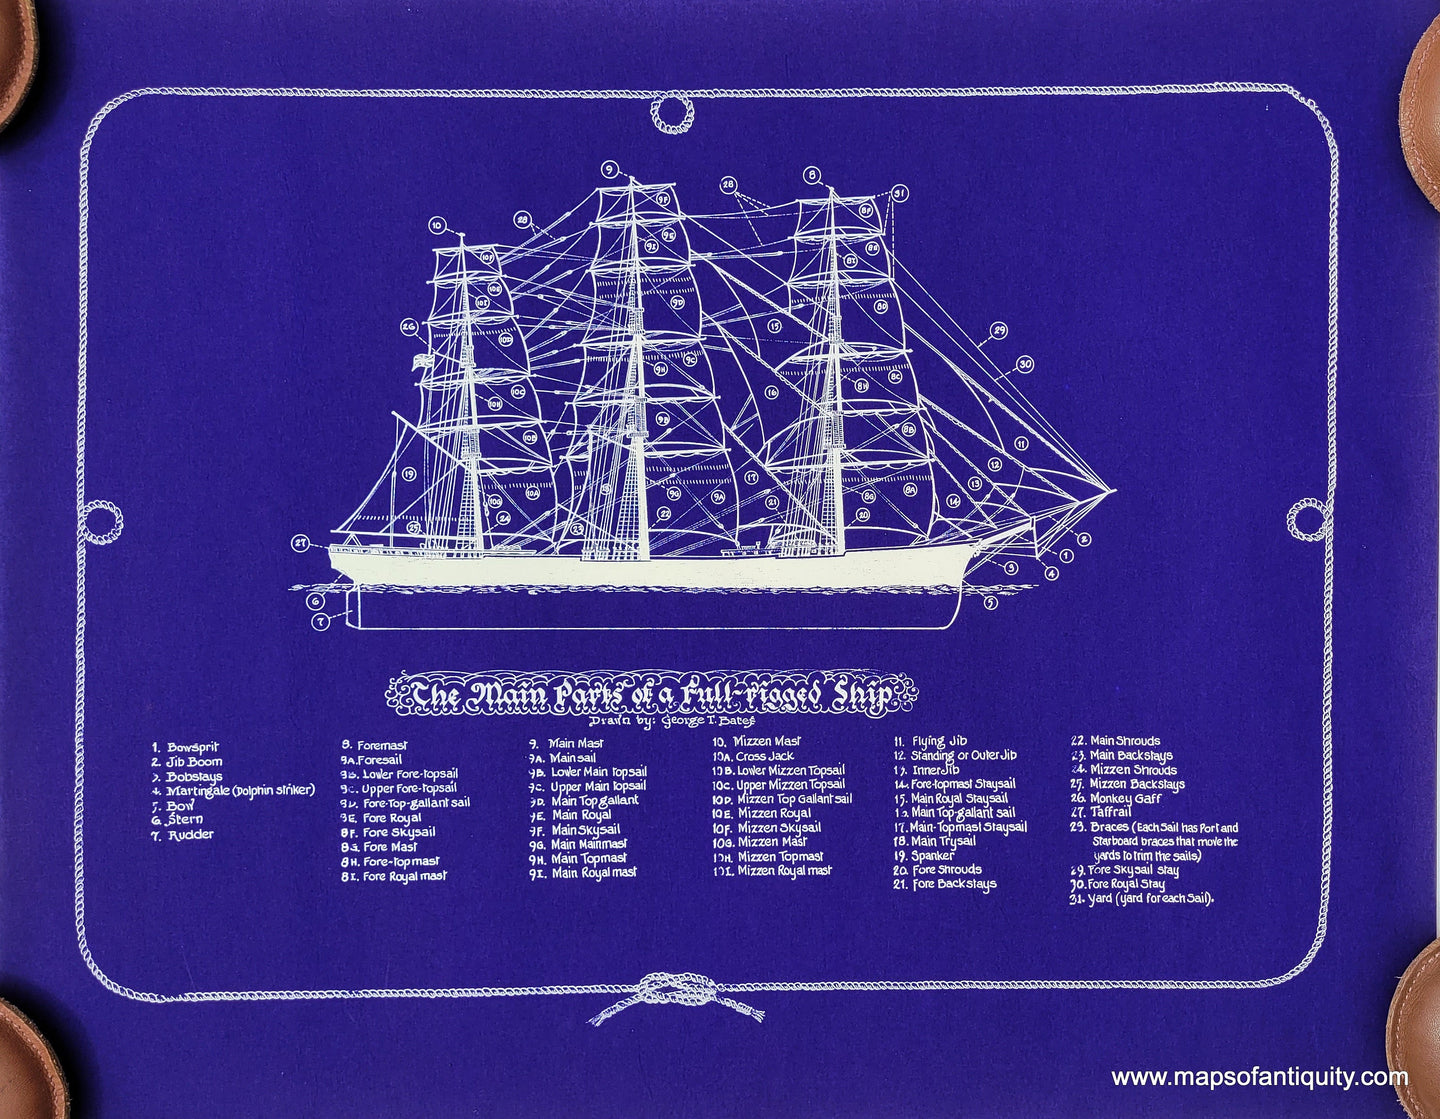 Reproduction-The-Main-Parts-of-a-Full-Rigged-Ship-Bates-Maps-Of-Antiquity